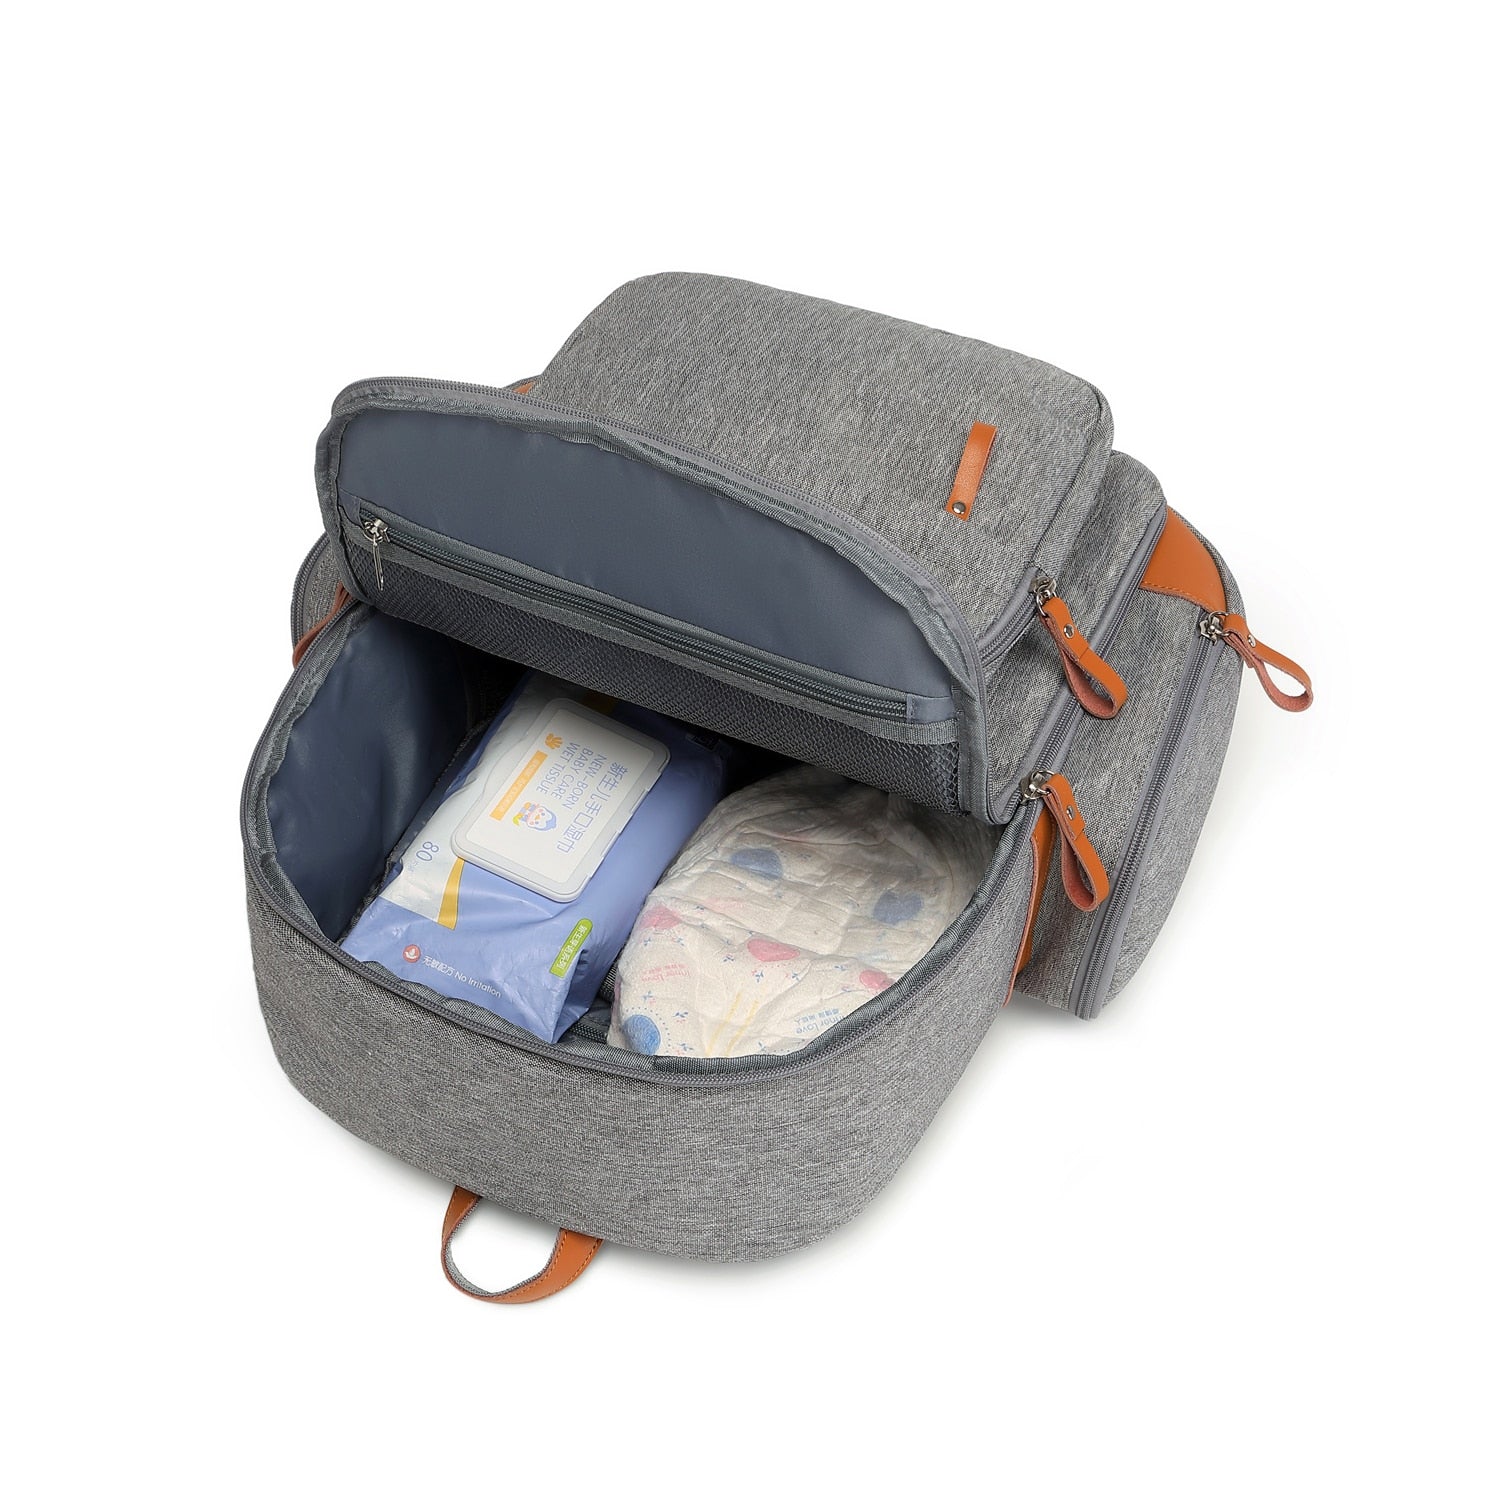 Diaper Bag With Laptop Sleeve The Store Bags 